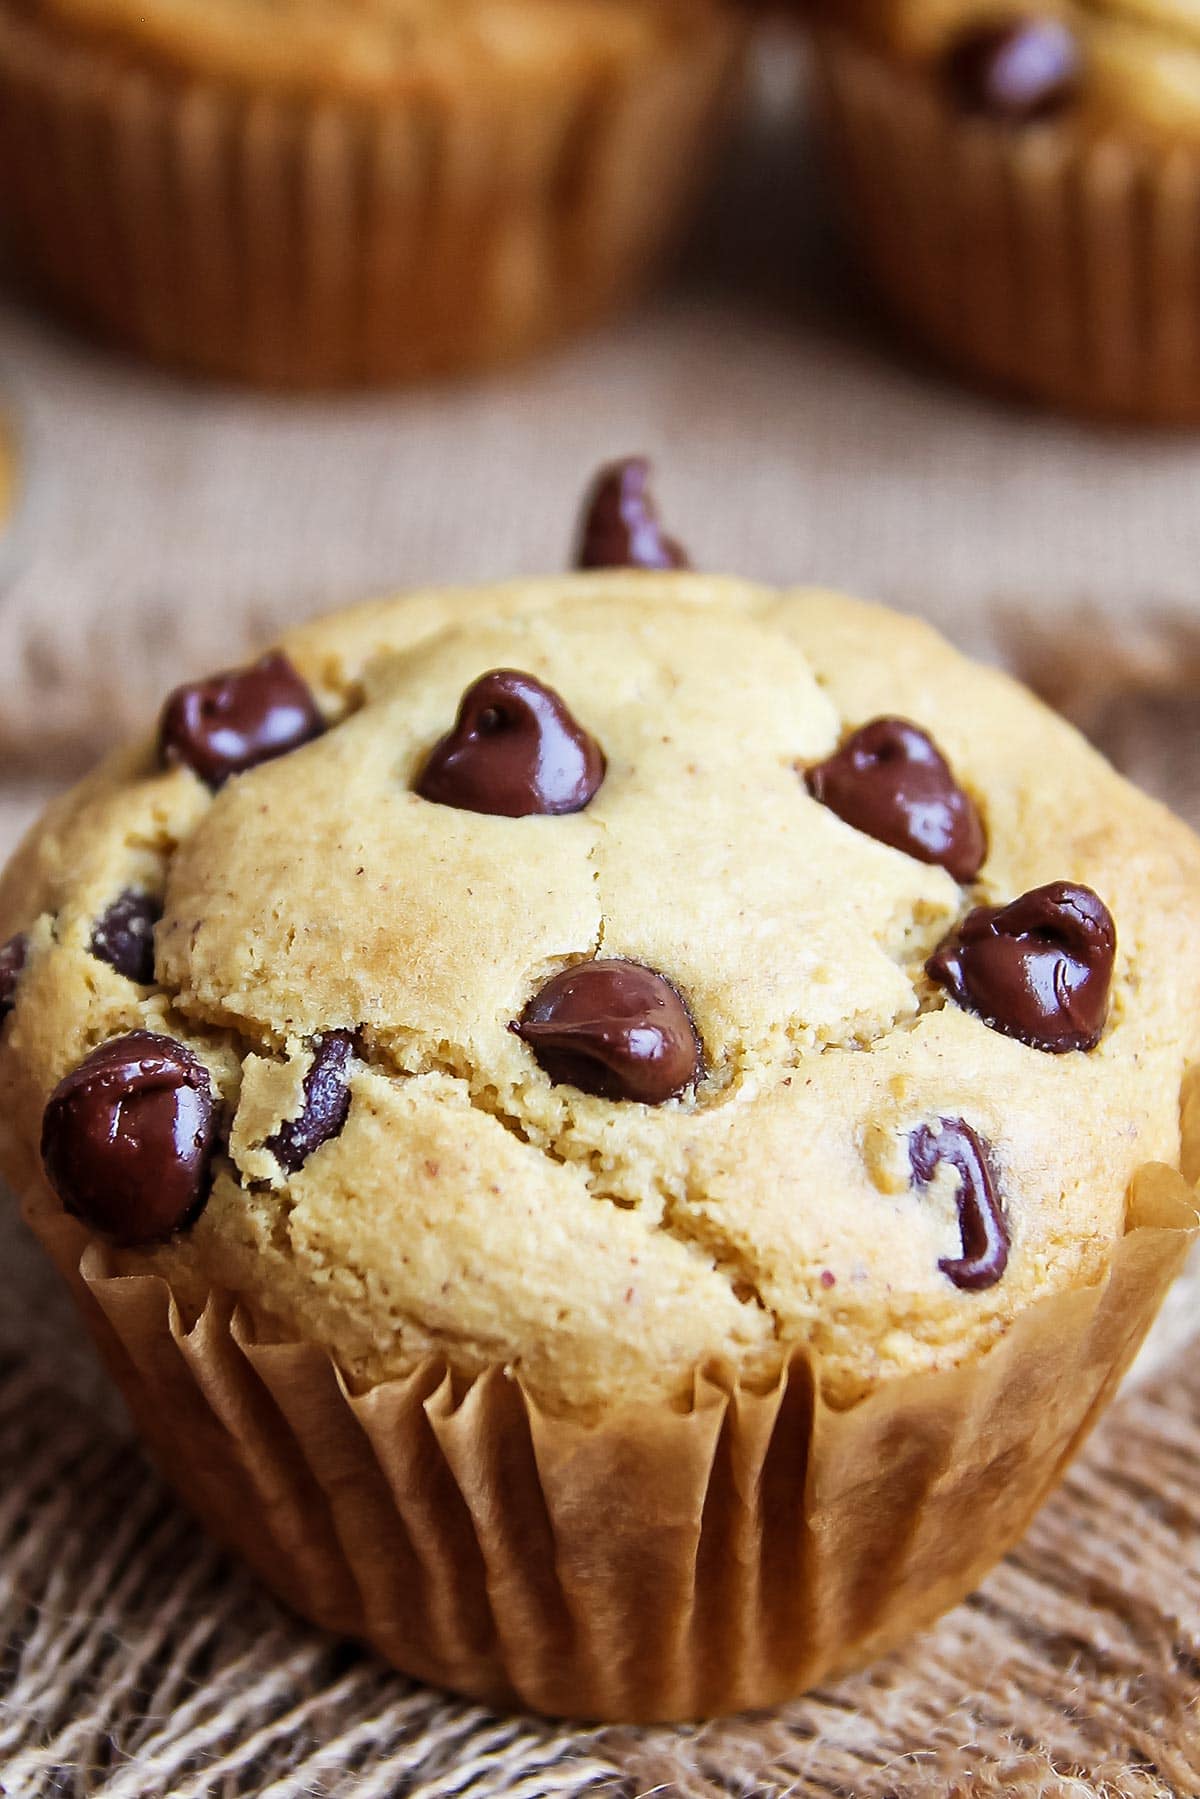 Gluten free peanut butter muffin with chocolate chips